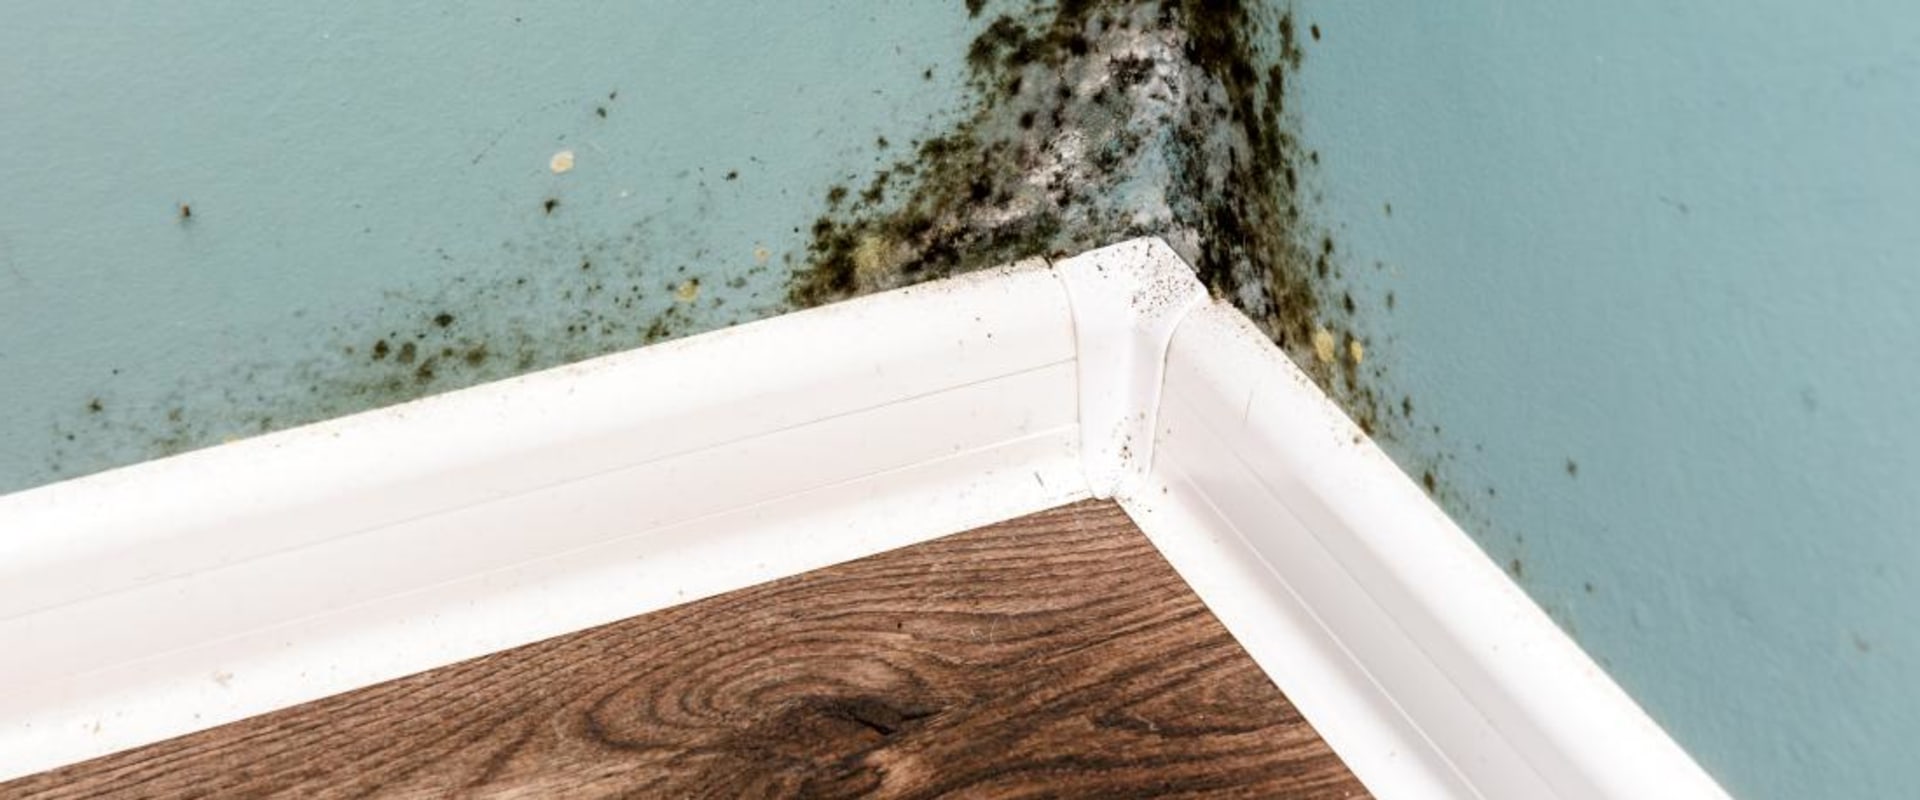 How do you tell if mold is making you sick?